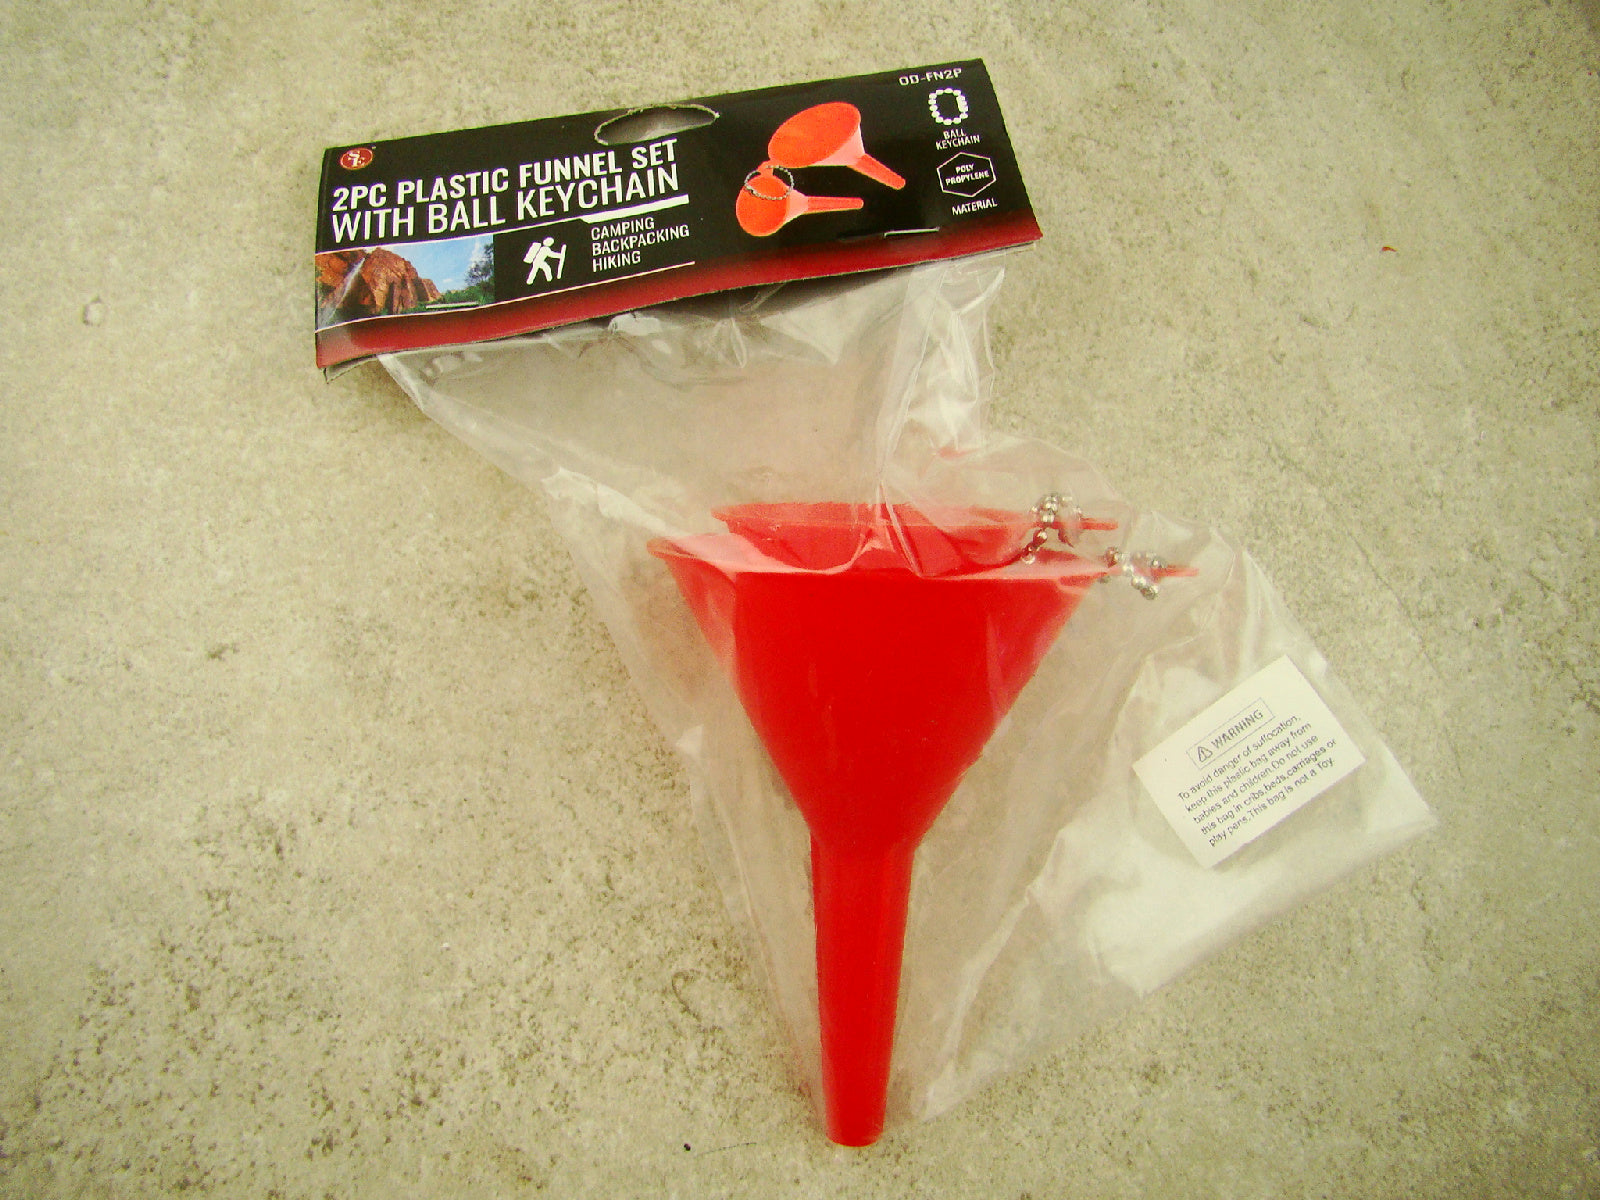 2Pc Plastic Funnel Set With Ball Keychain, Camping, Prospecting, Mining, Hiking